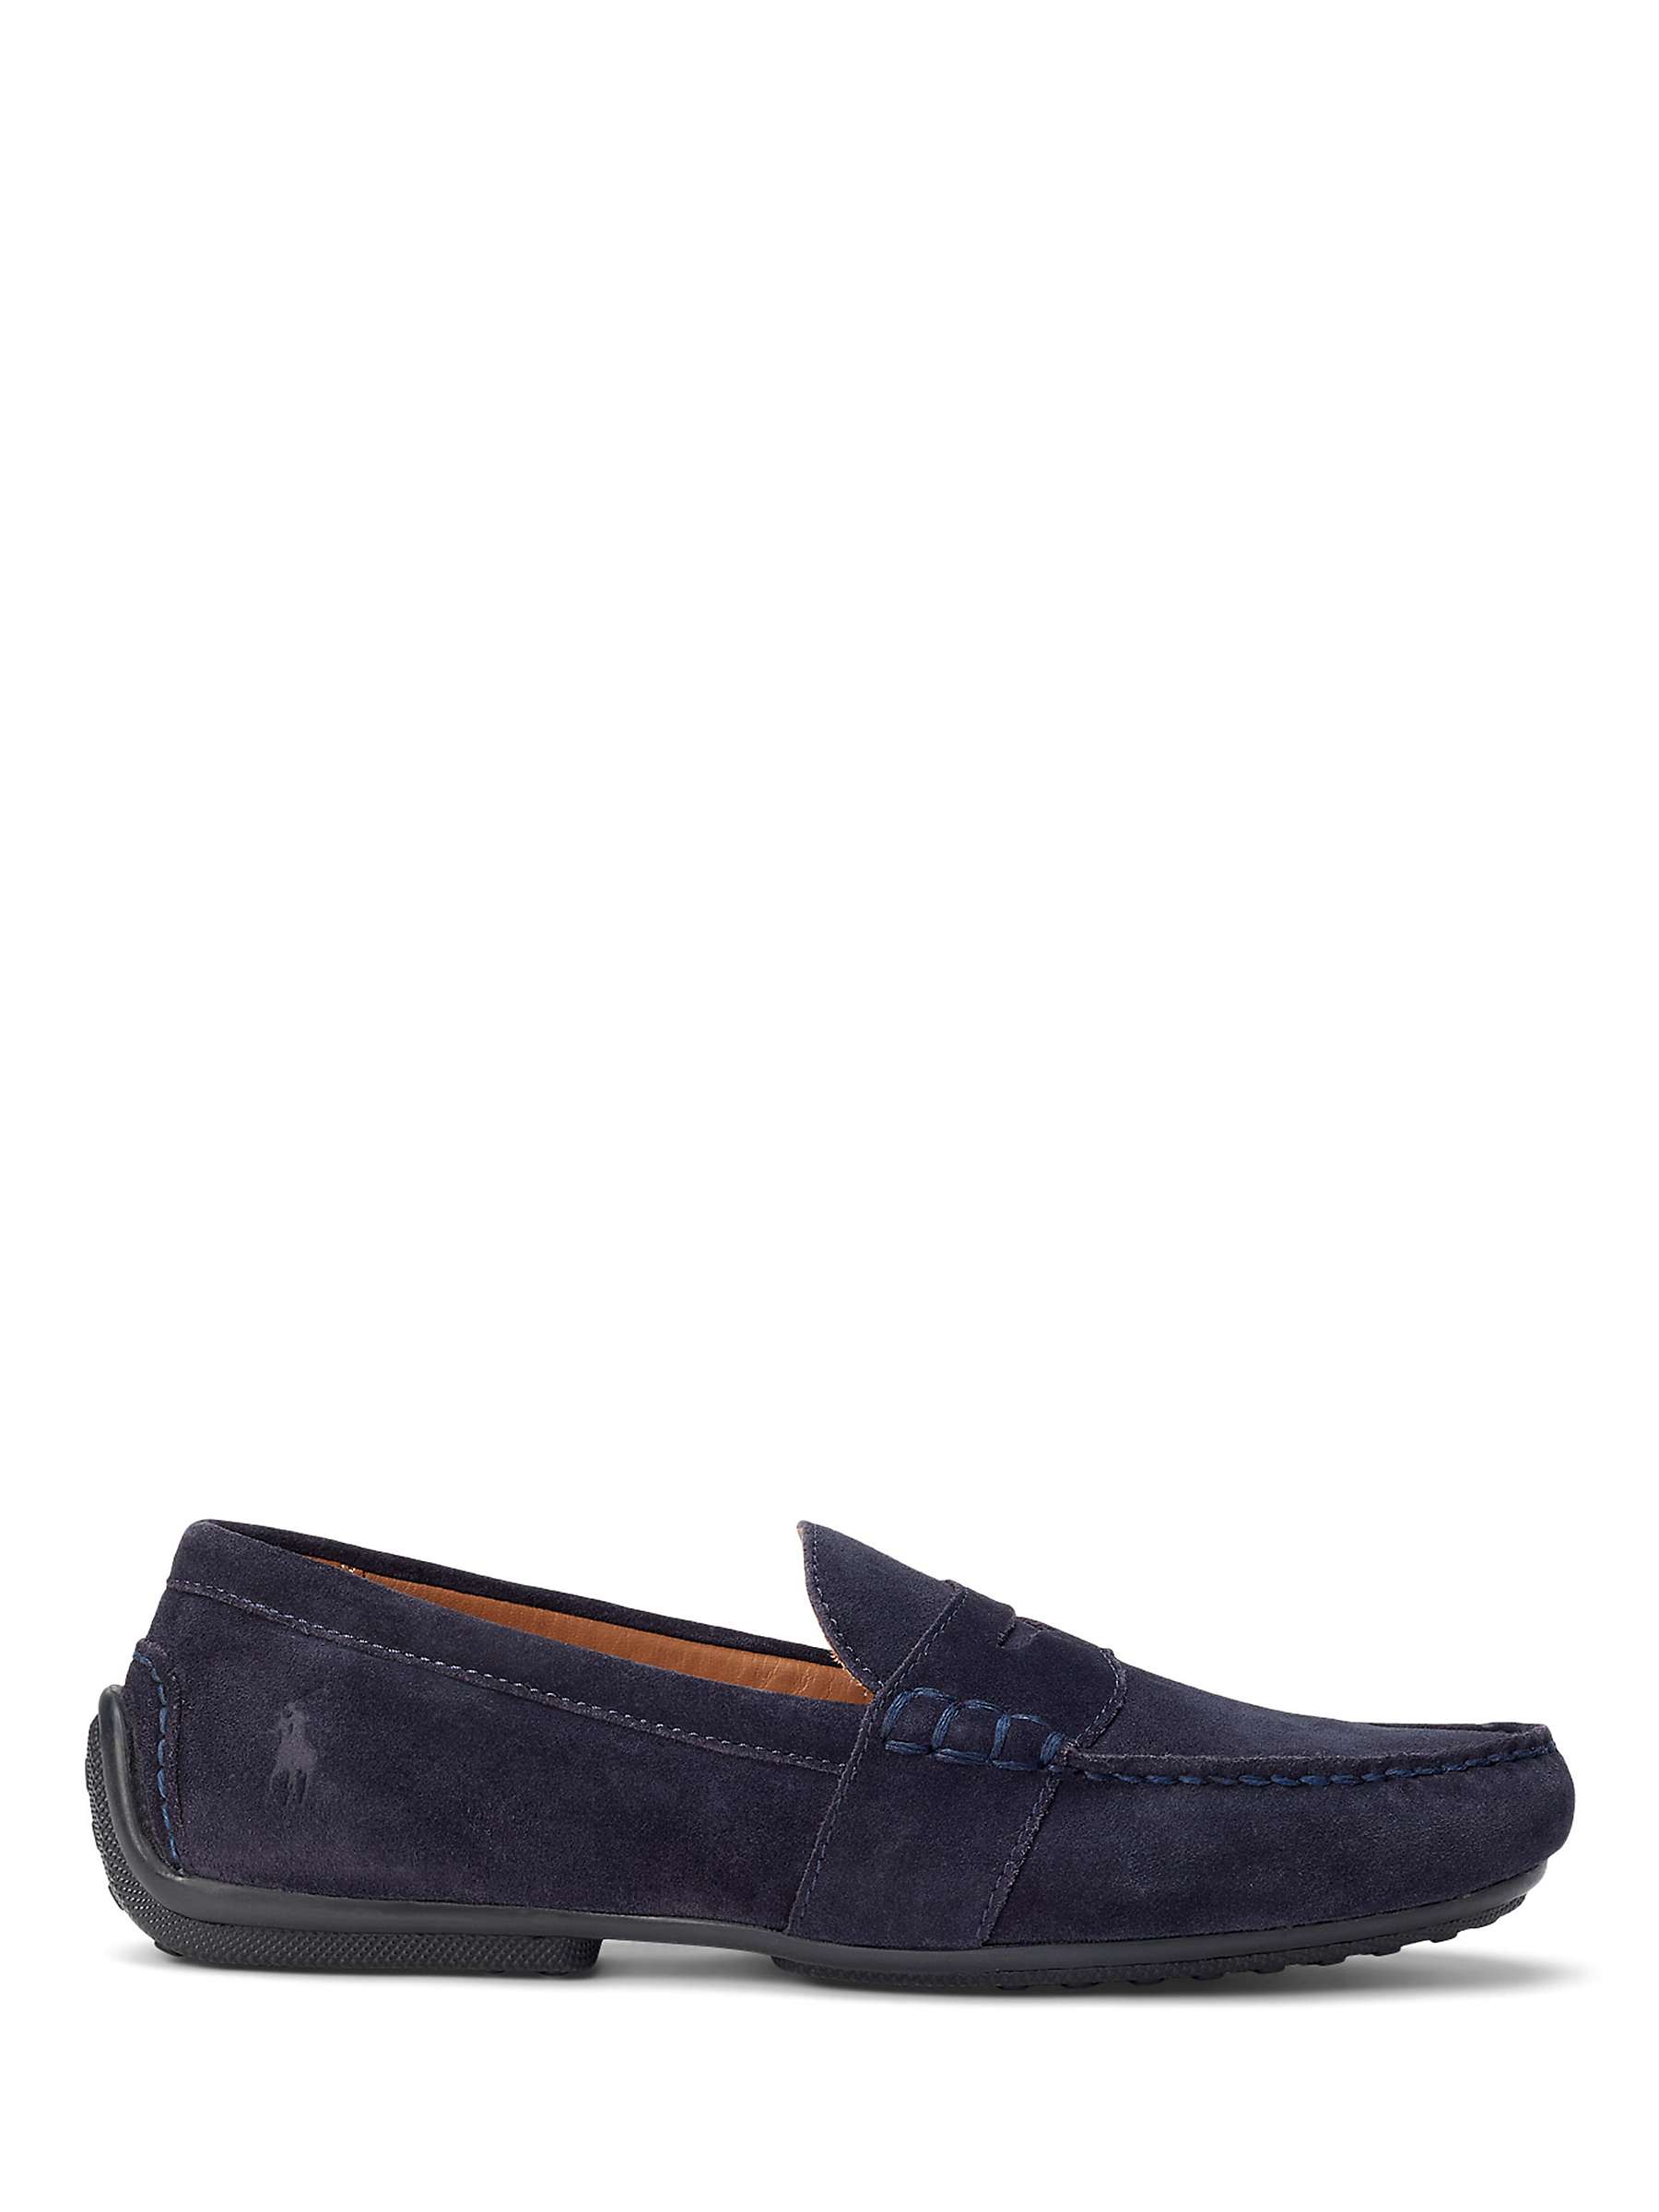 Ralph Lauren Reynold Suede Moccasin Loafers, Navy at John Lewis & Partners